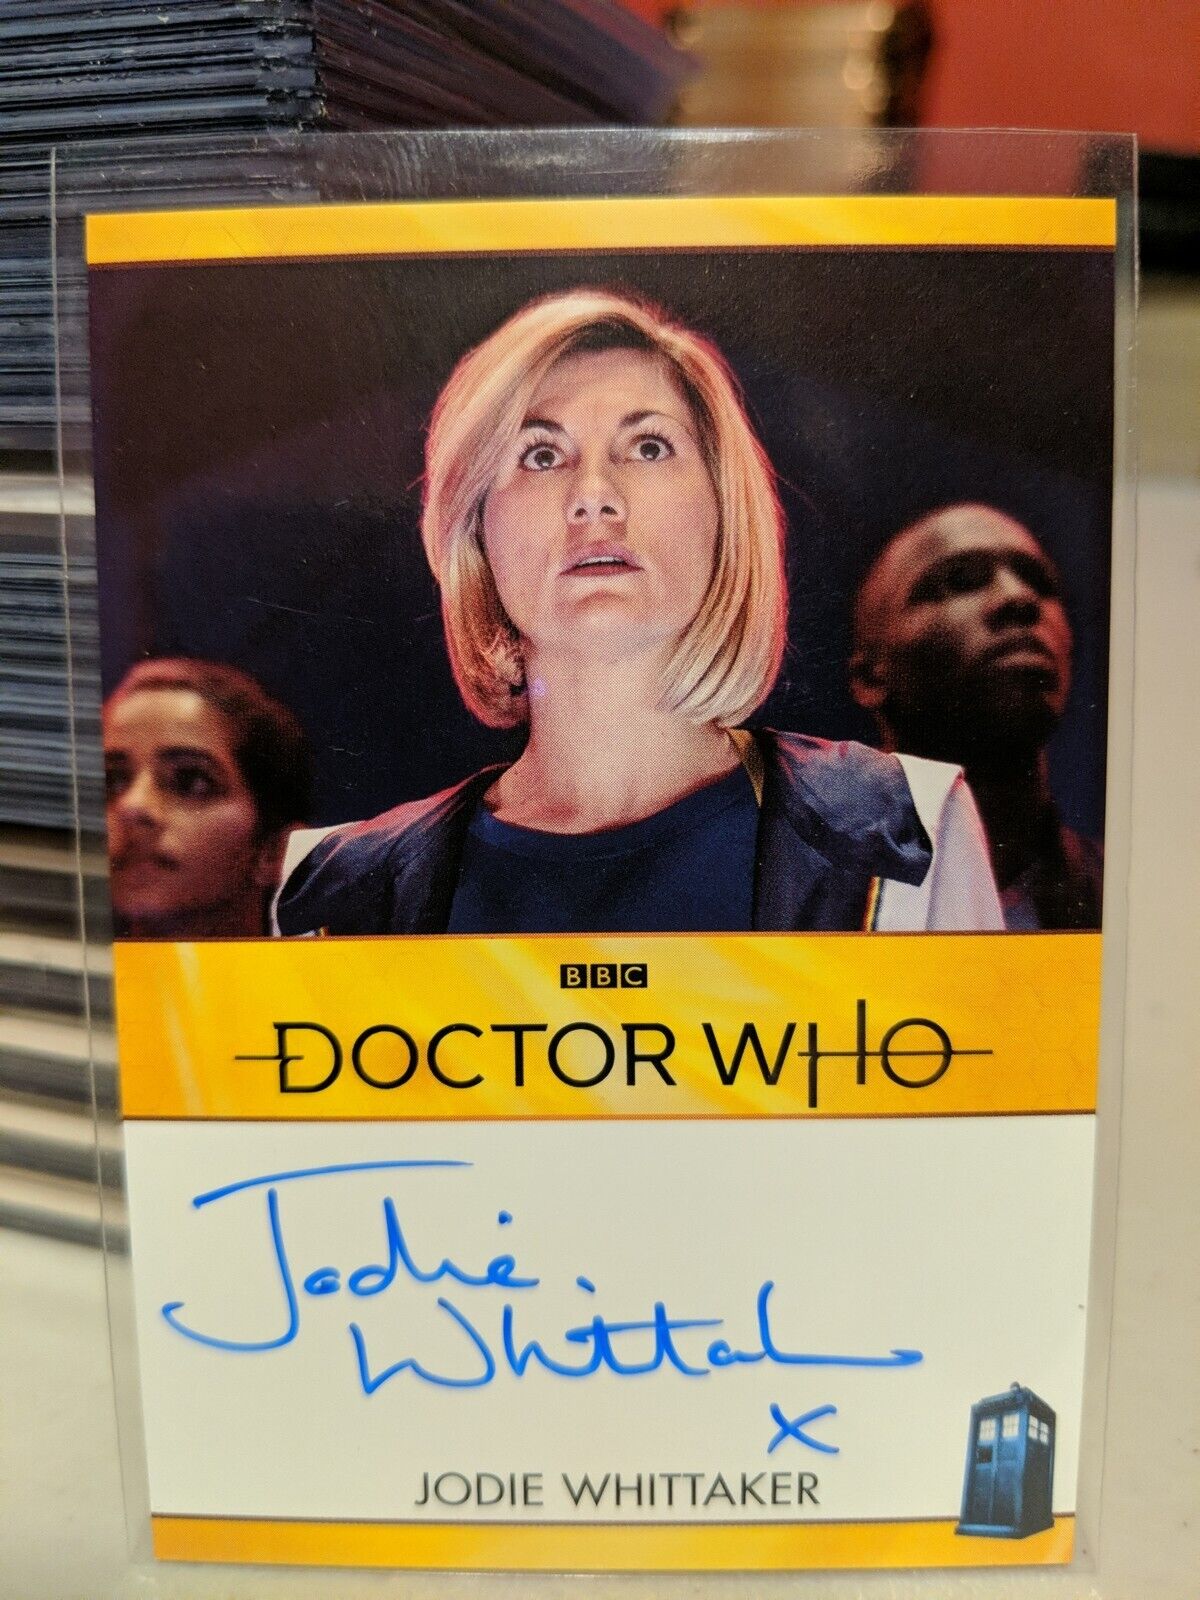 Doctor Who Series 11 & 12 Jodie Whittaker Autograph Card as The Doctor UK Exclus